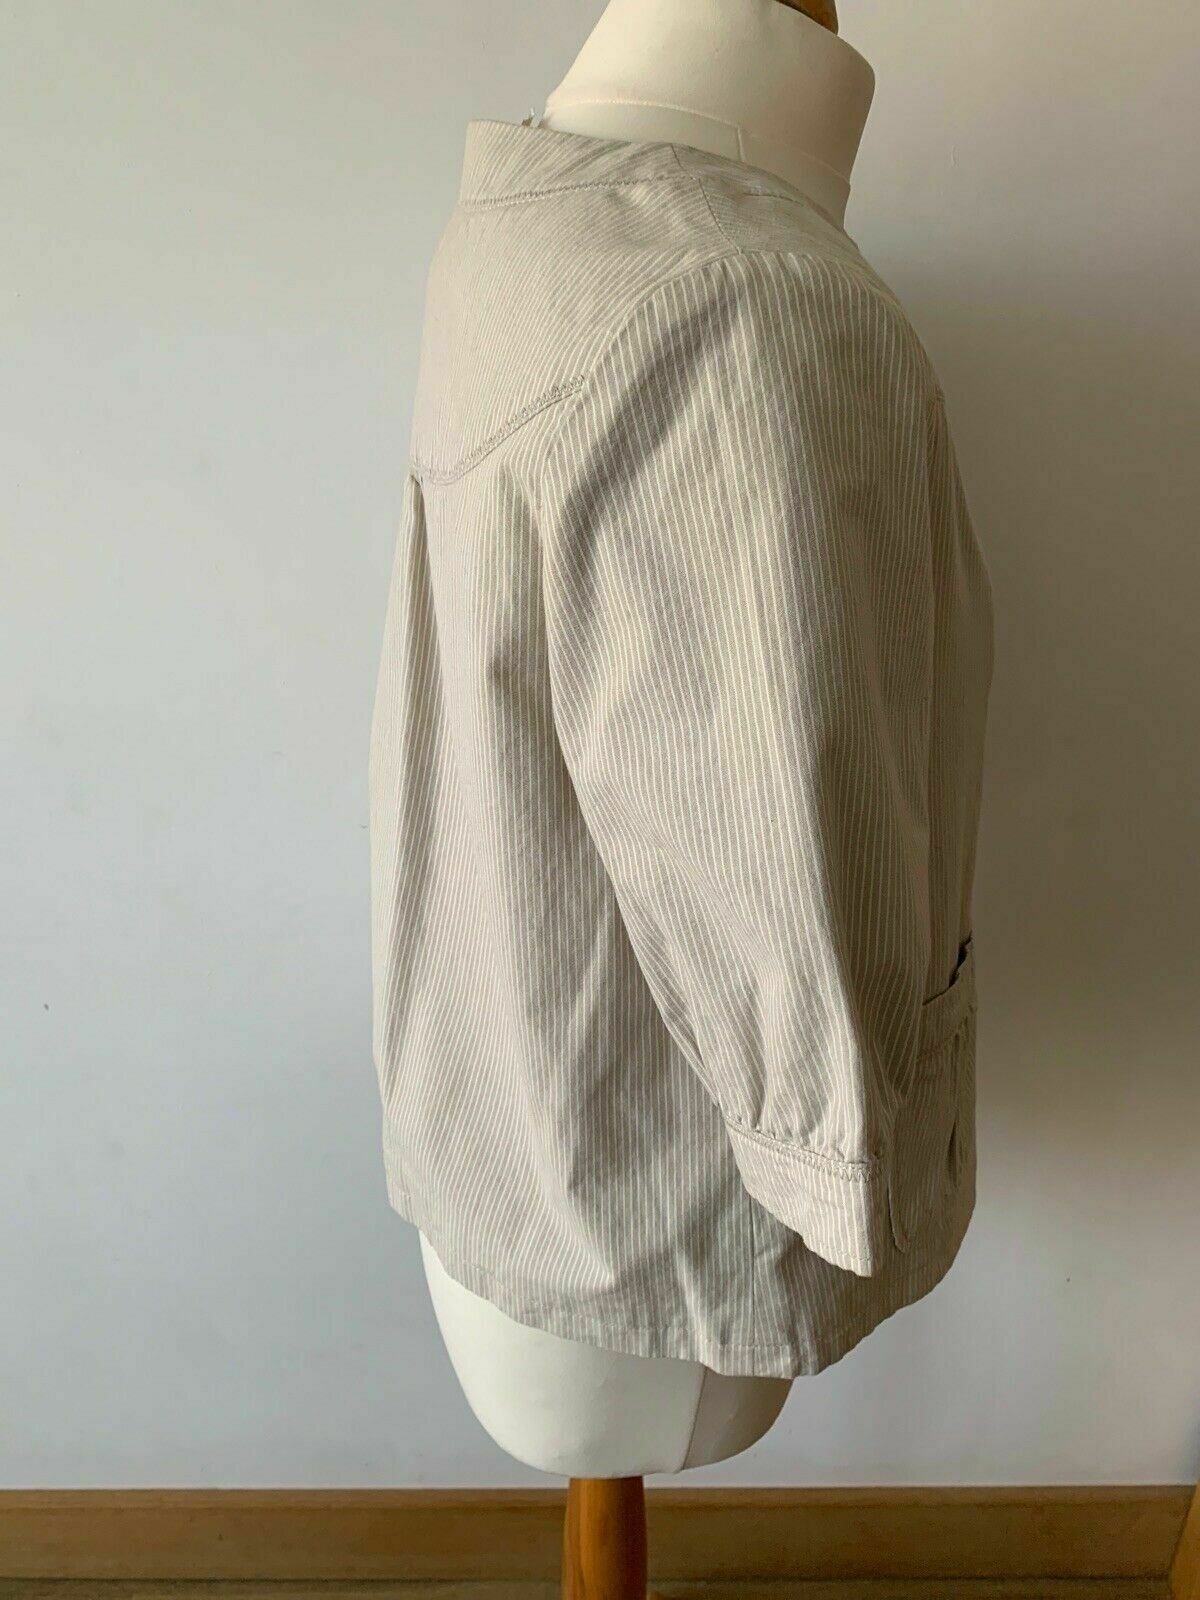 M&S Spring Jacket Size 12 Beige 3/4 Sleeves Pockets Striped Collarless